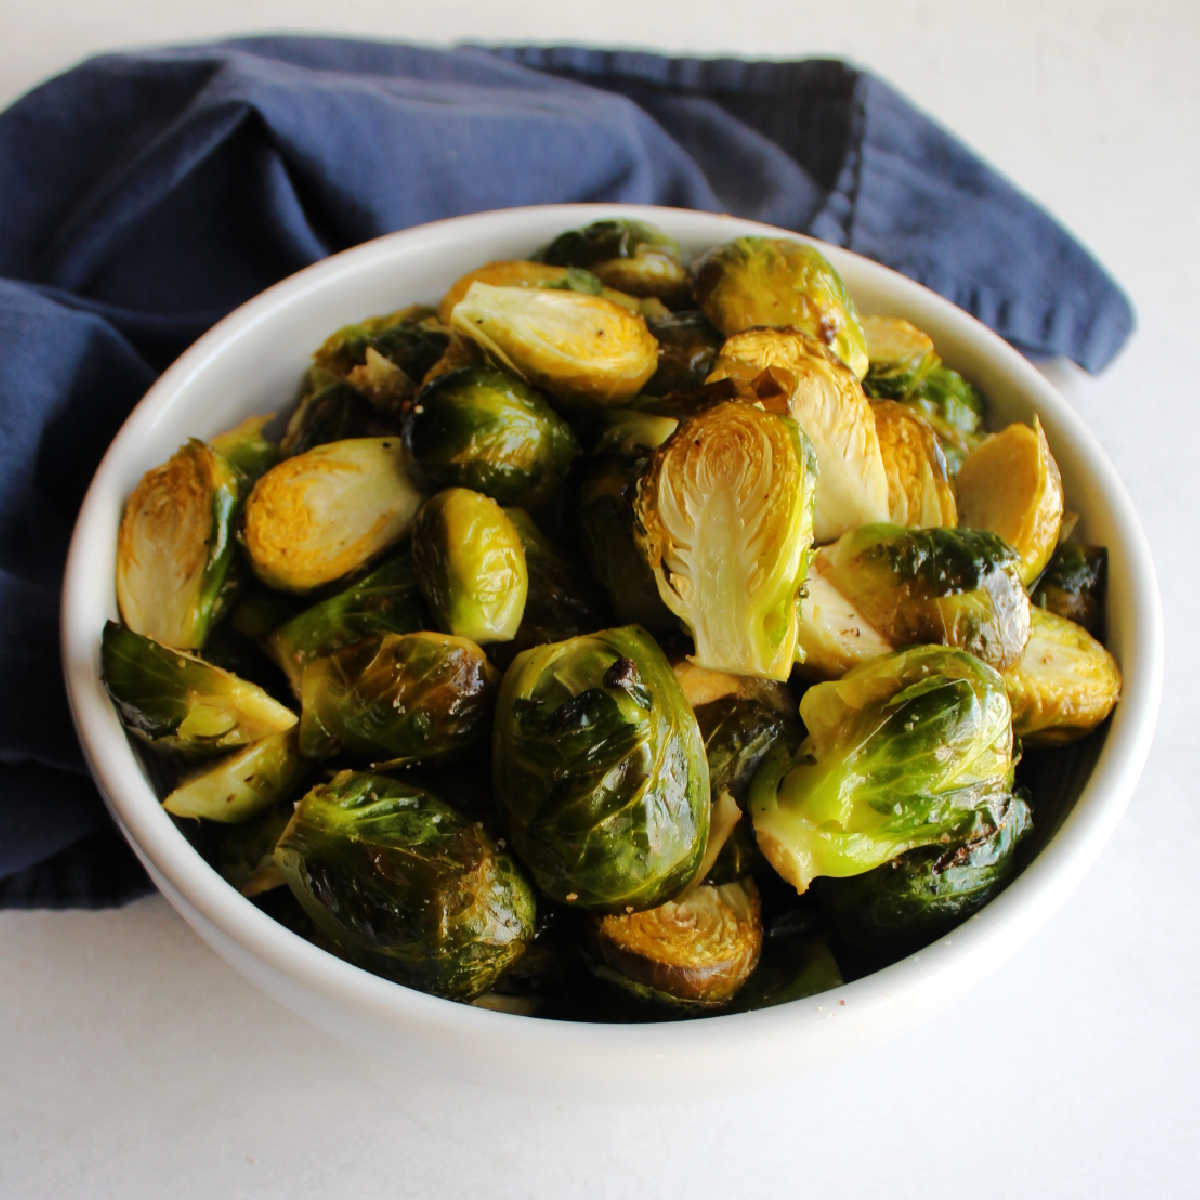 Bowl of roasted brussels sprout halves ready to serve.